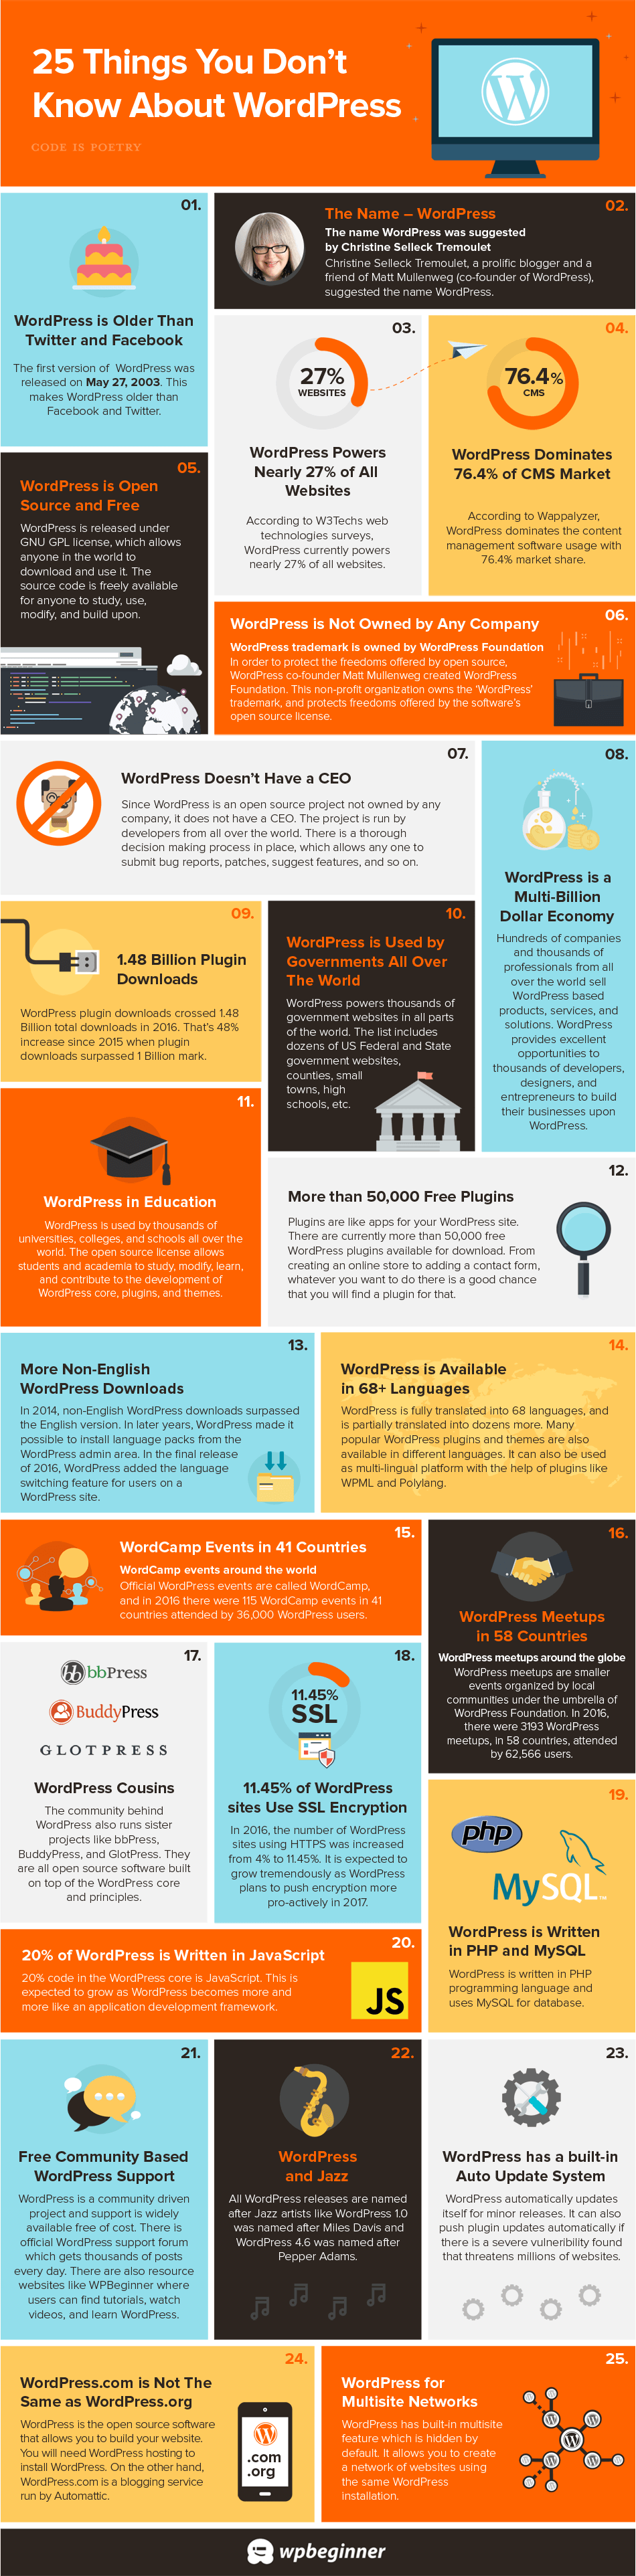 25 Interesting Facts About WordPress (Infographic)